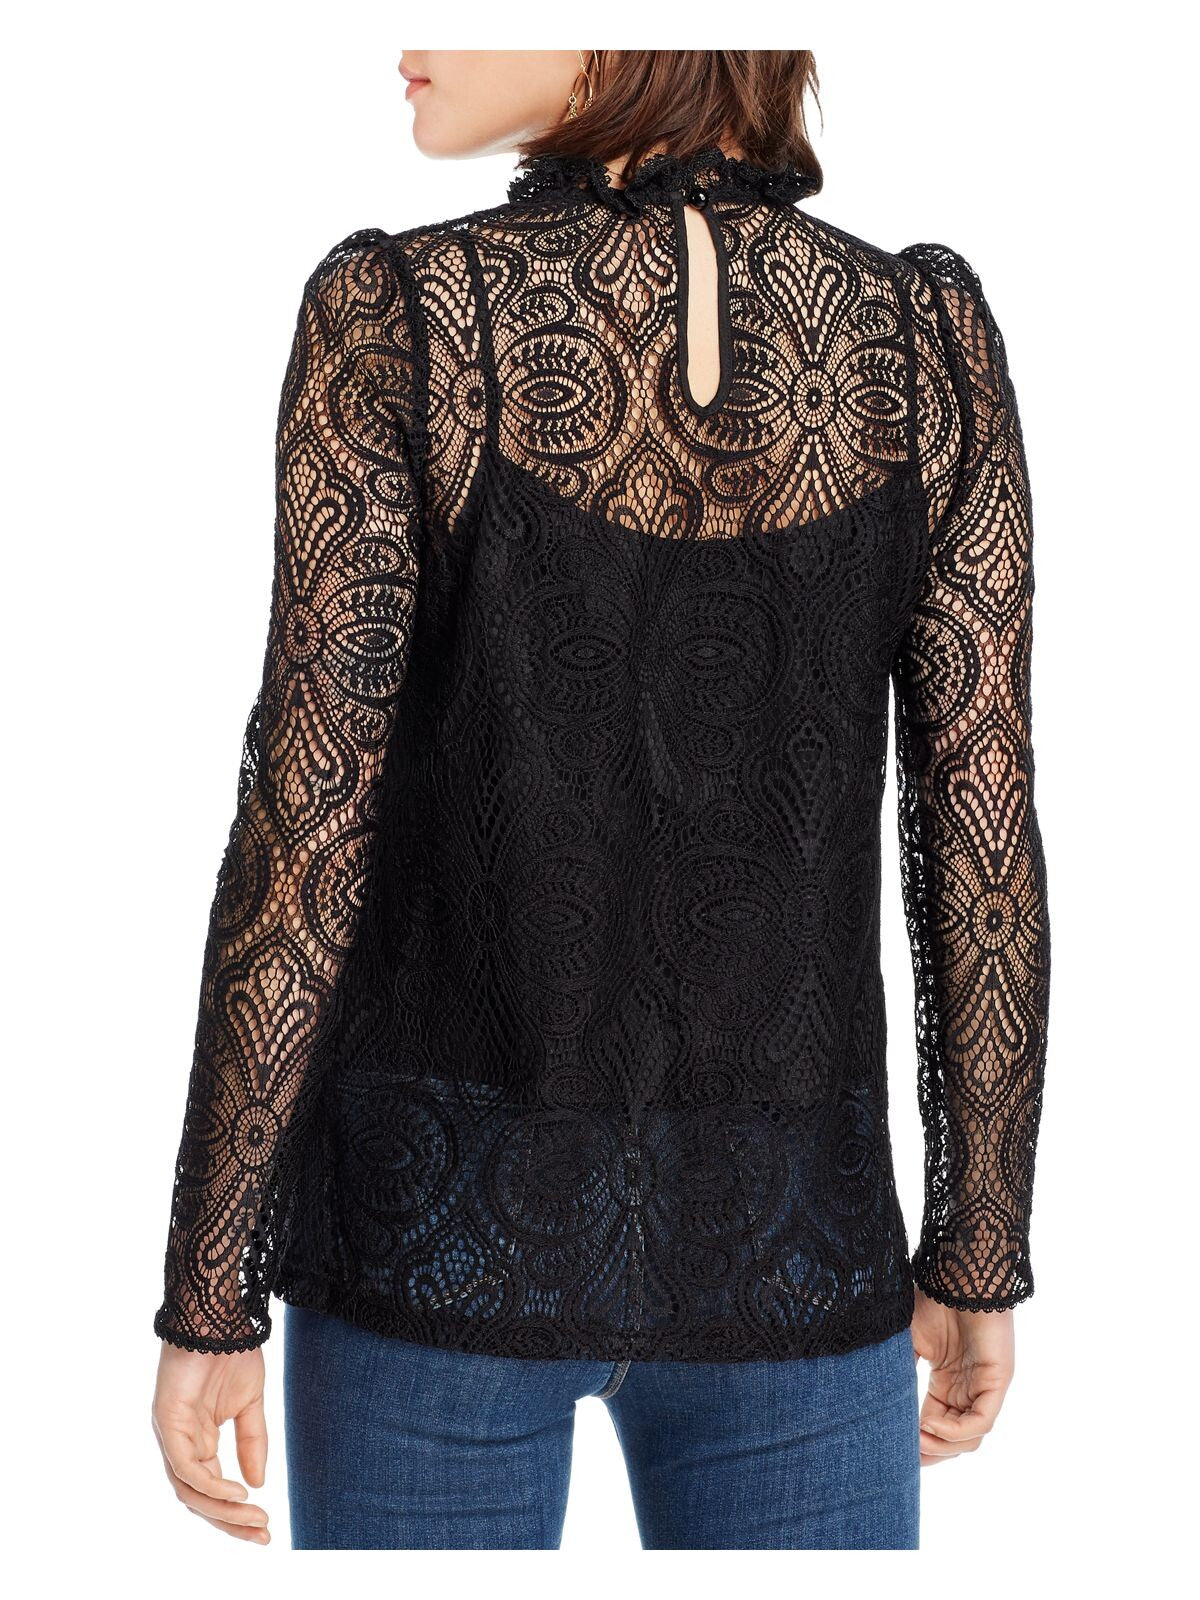 LINI Womens Black Crochet Top With Mock Neck Long Sleeve Top Size: S